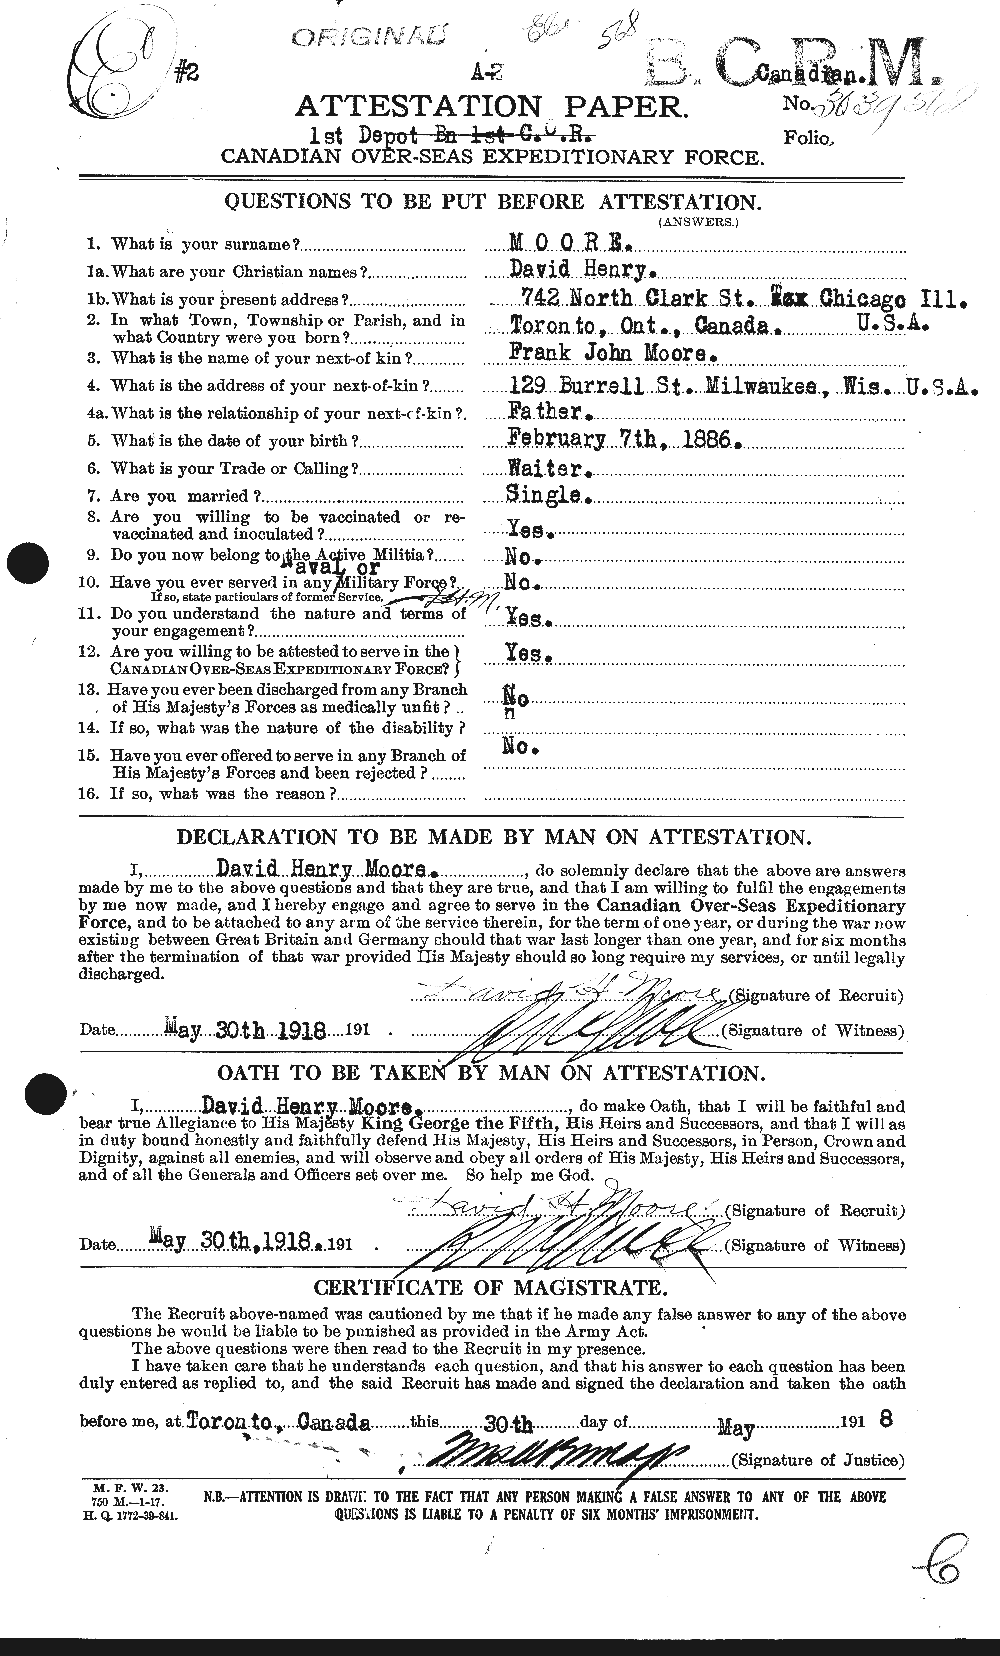 Personnel Records of the First World War - CEF 506573a